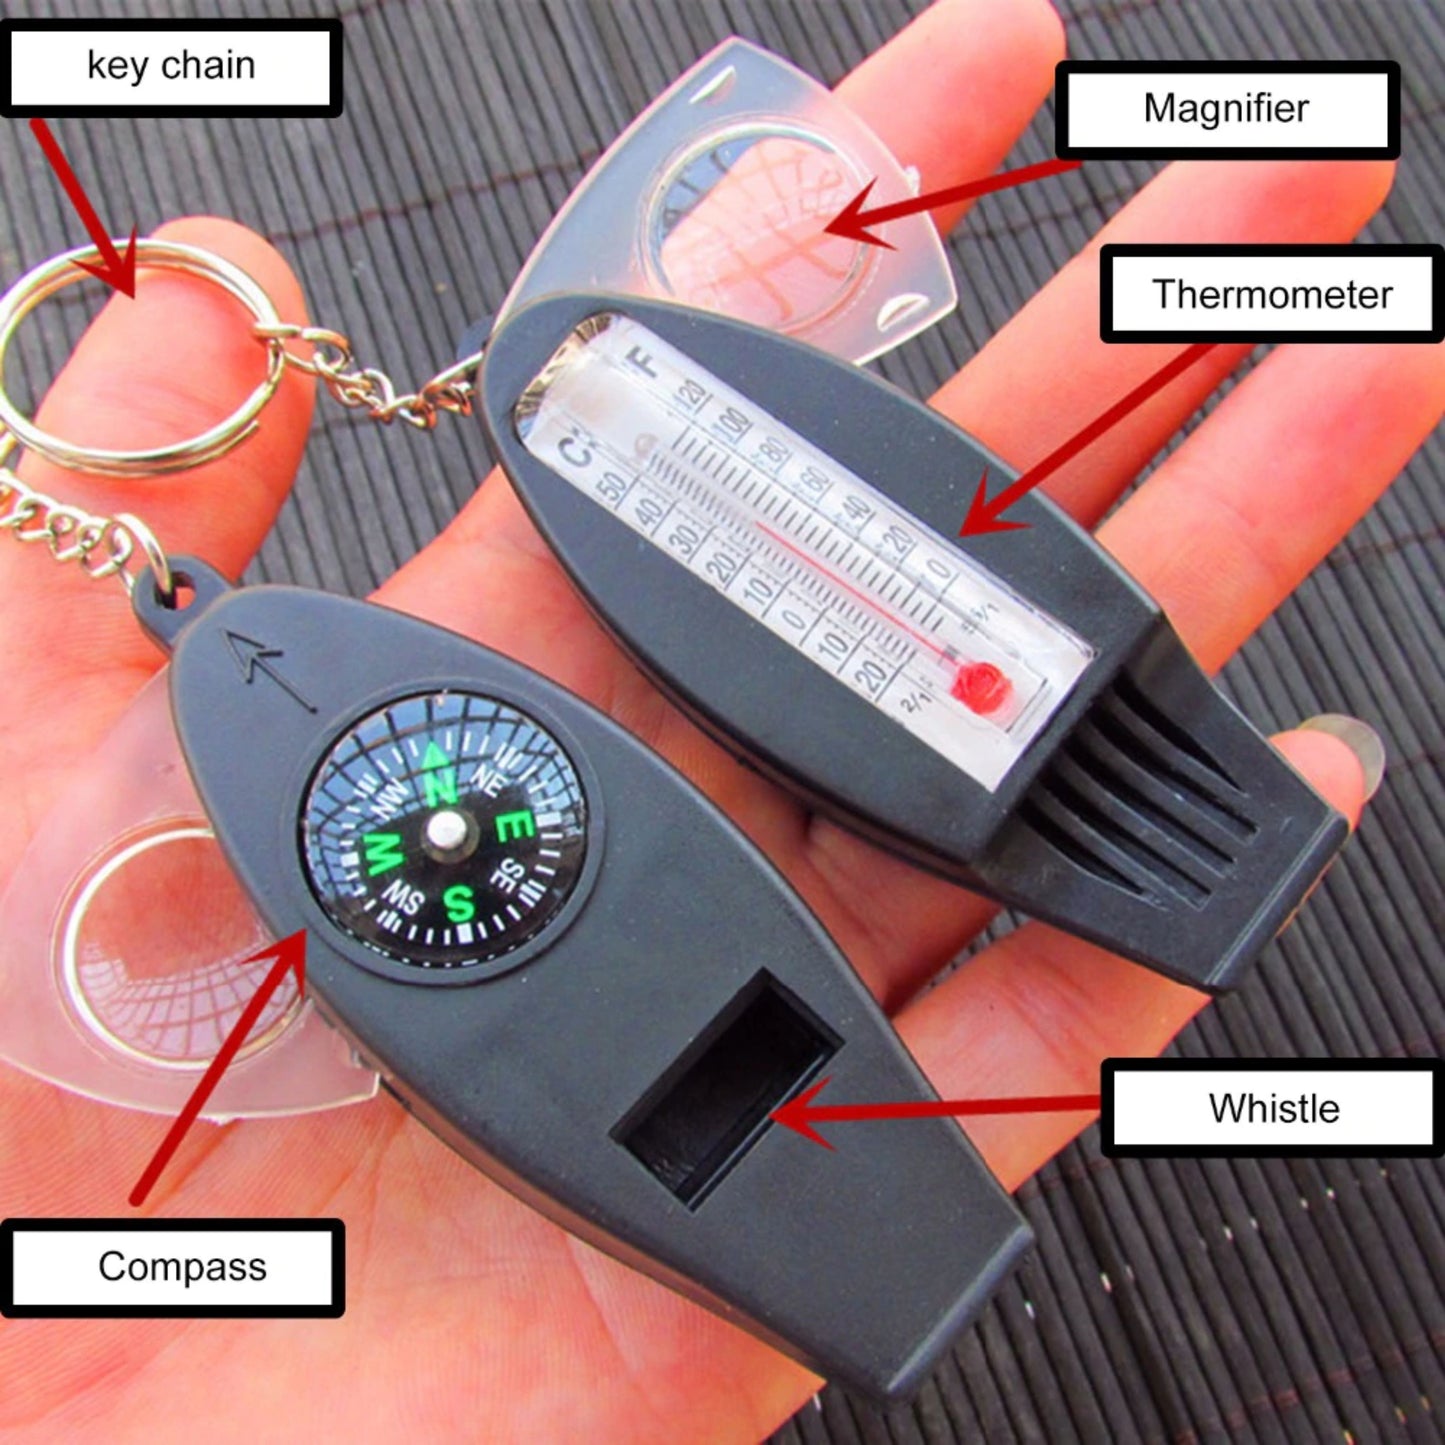 EDC Compass Whistle Thermometer Magnifier 4 in 1 Survival Emergency Camping